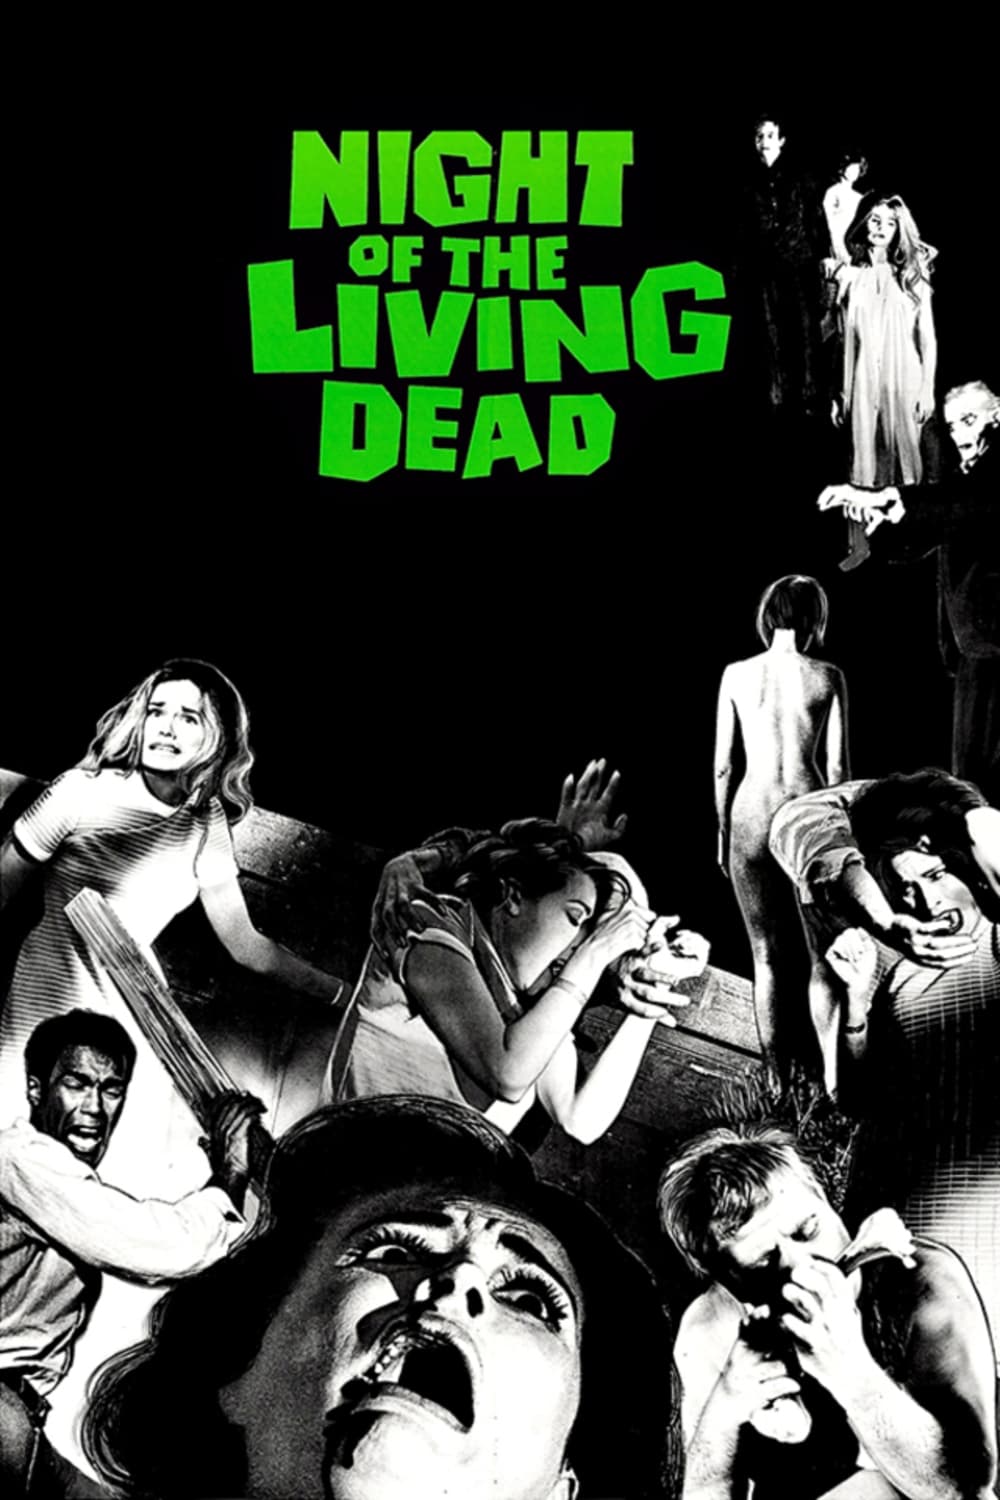 "Night of the Living Dead" (1968)